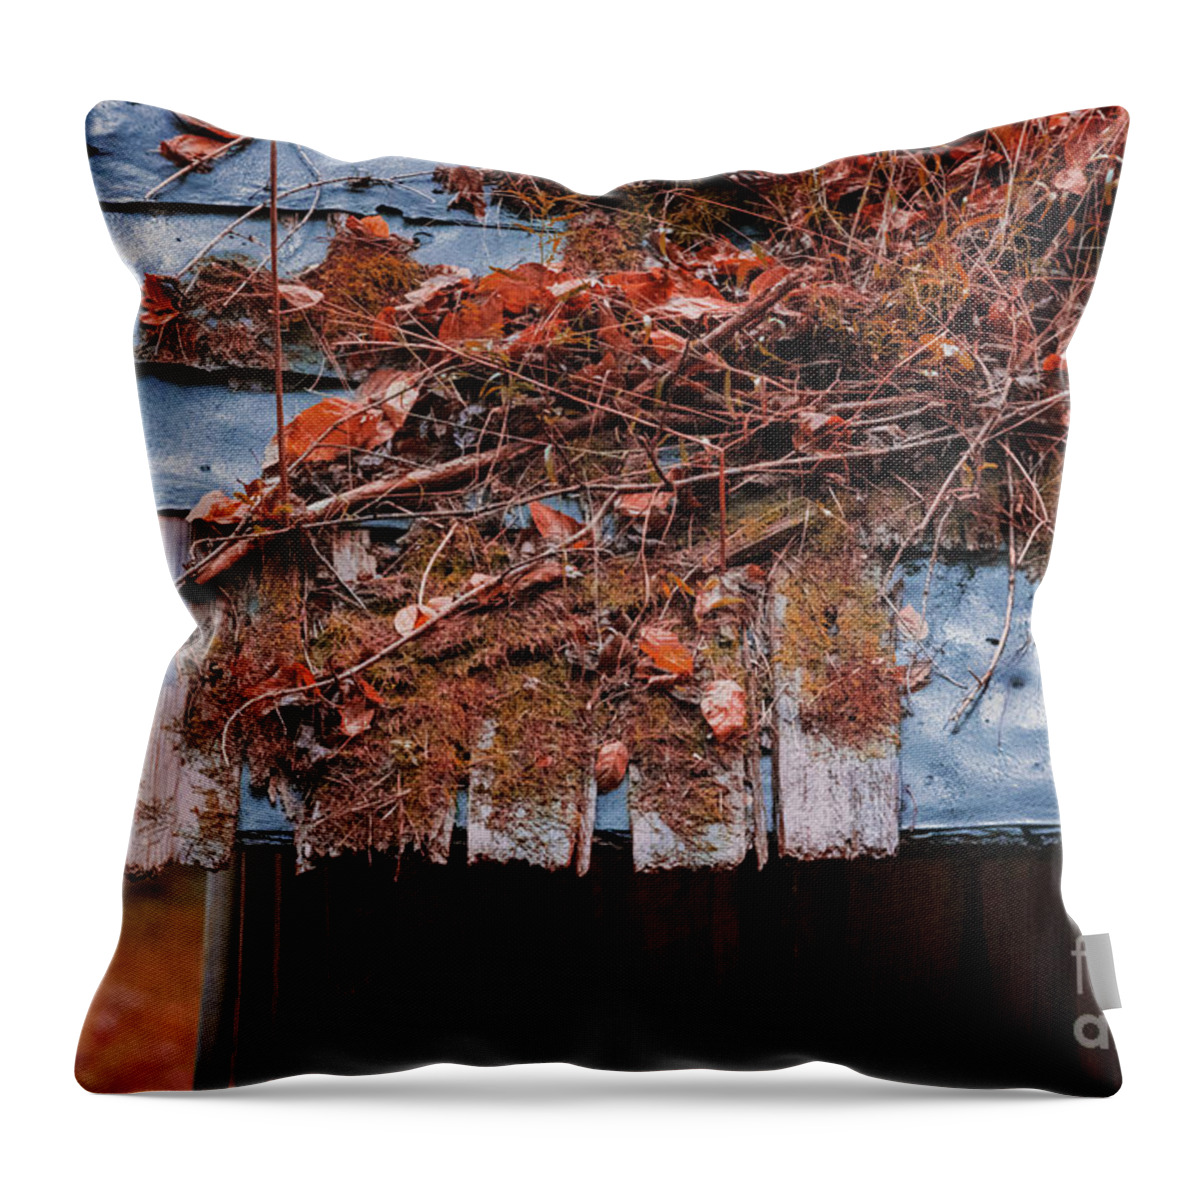 Harvest Throw Pillow featuring the photograph Harvest Barn by Doug Sturgess